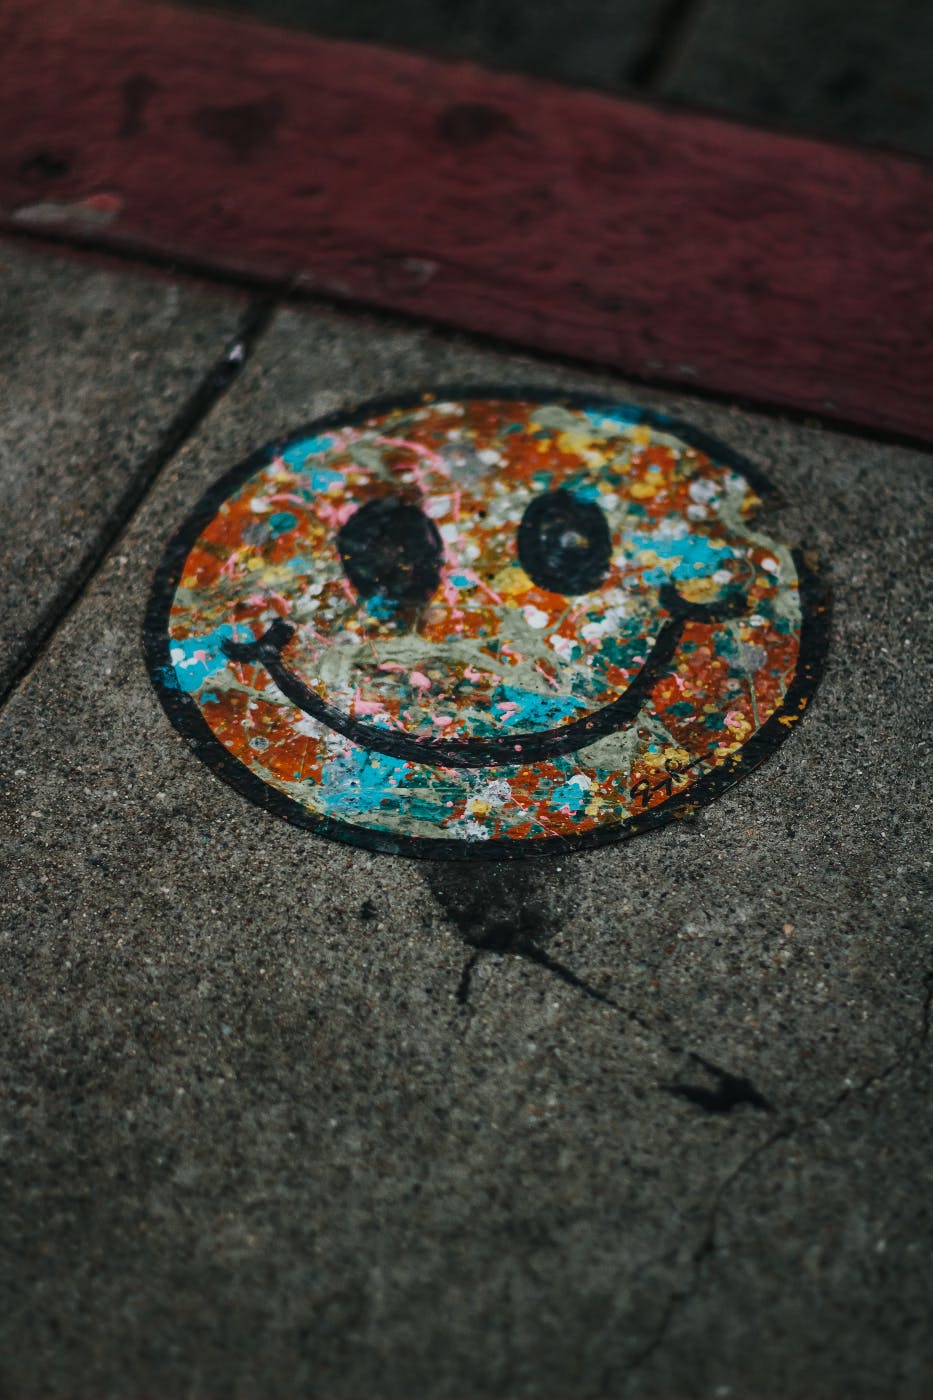 A multi-colored smiley face painted on a sidewalk